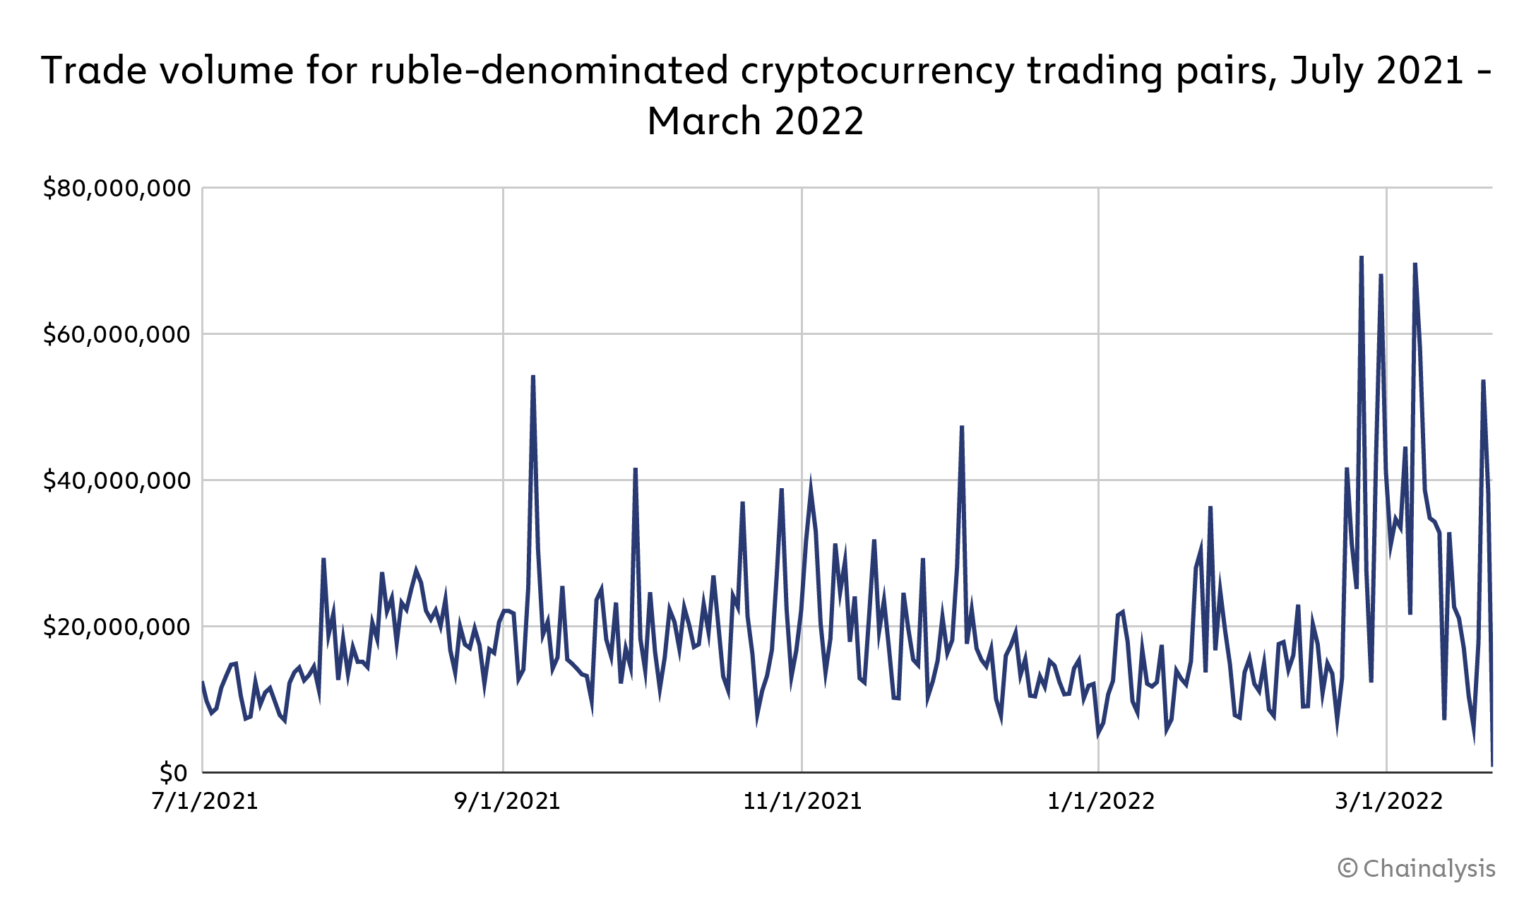 Chart showing trade volume for ruble-denominated crypto